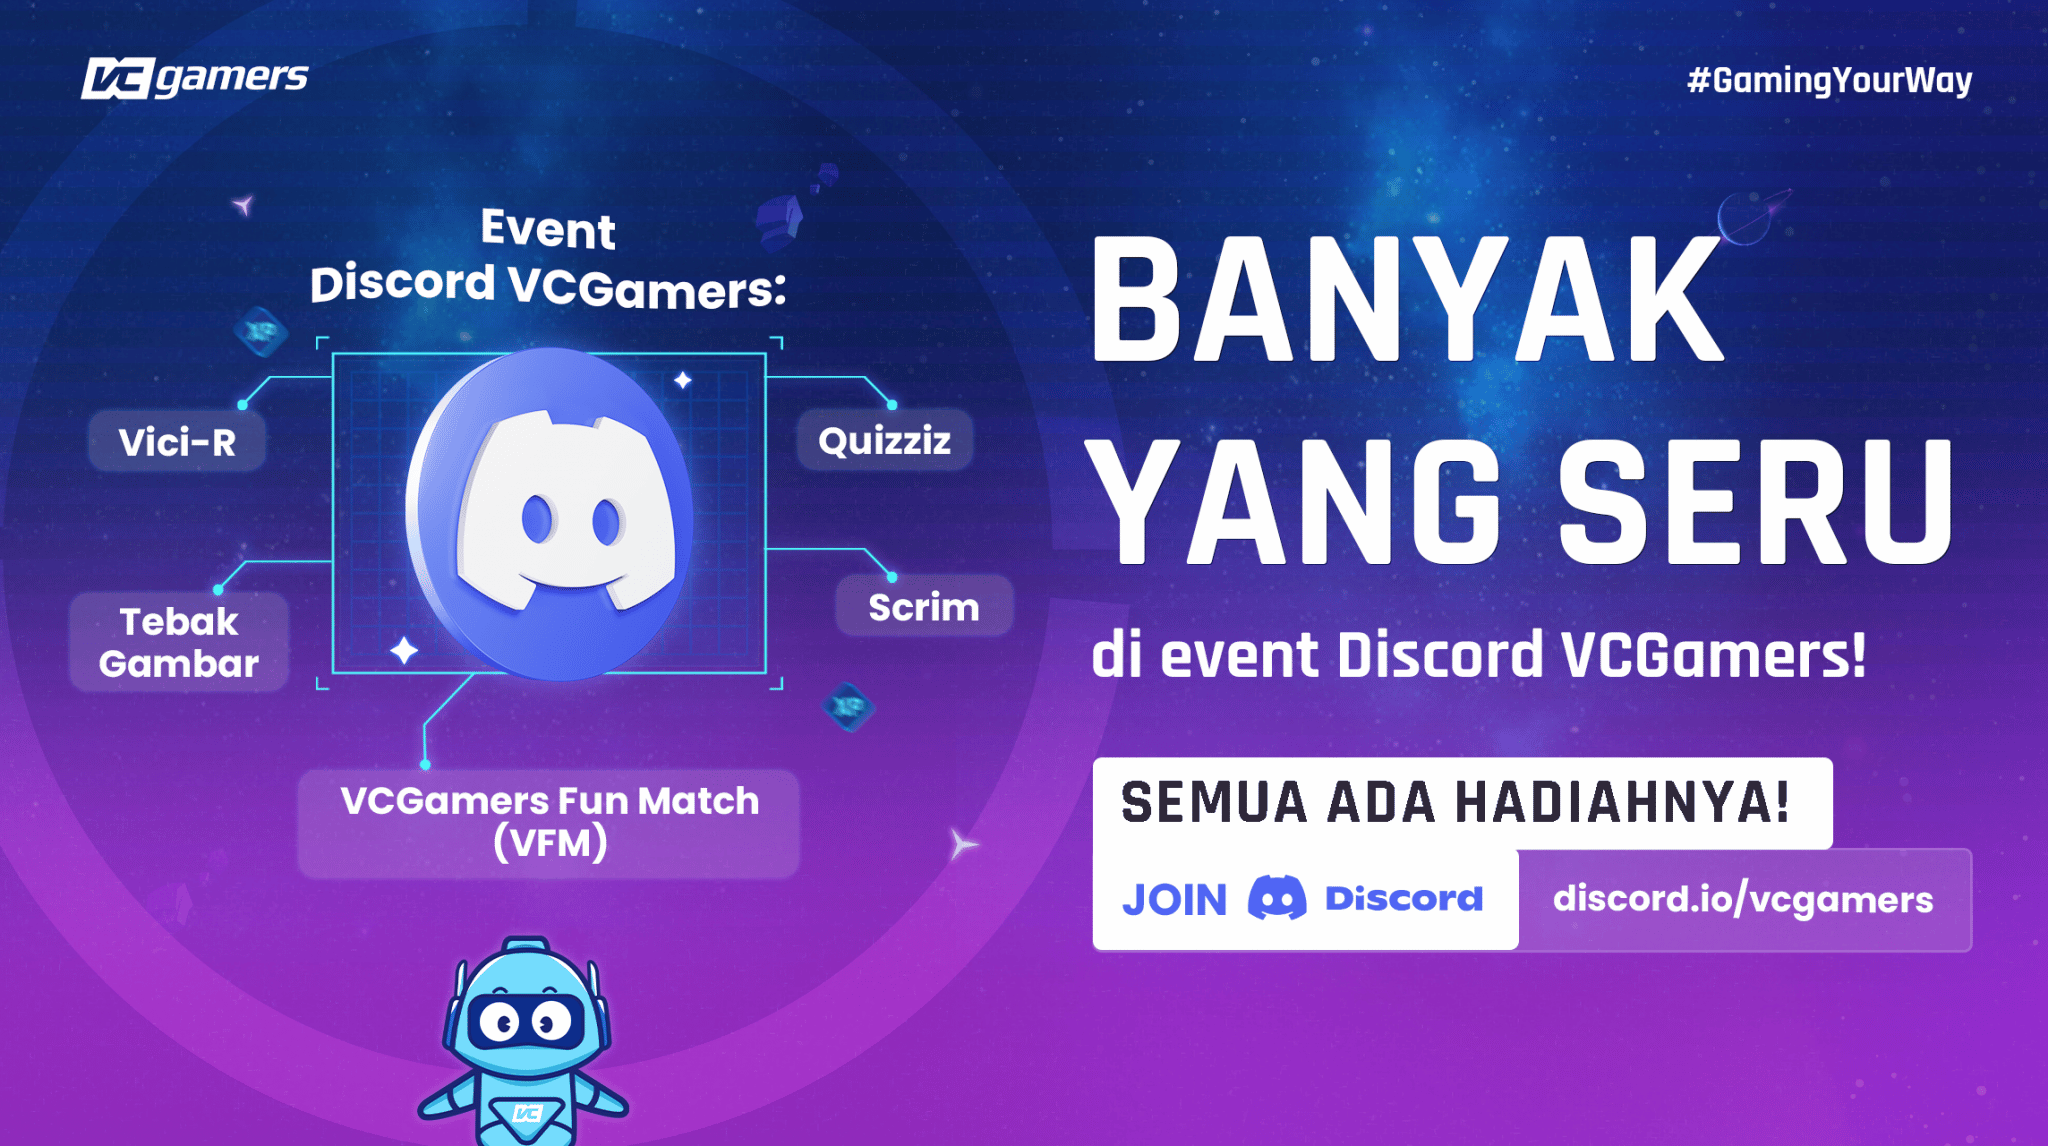 Event Discord VCGamers